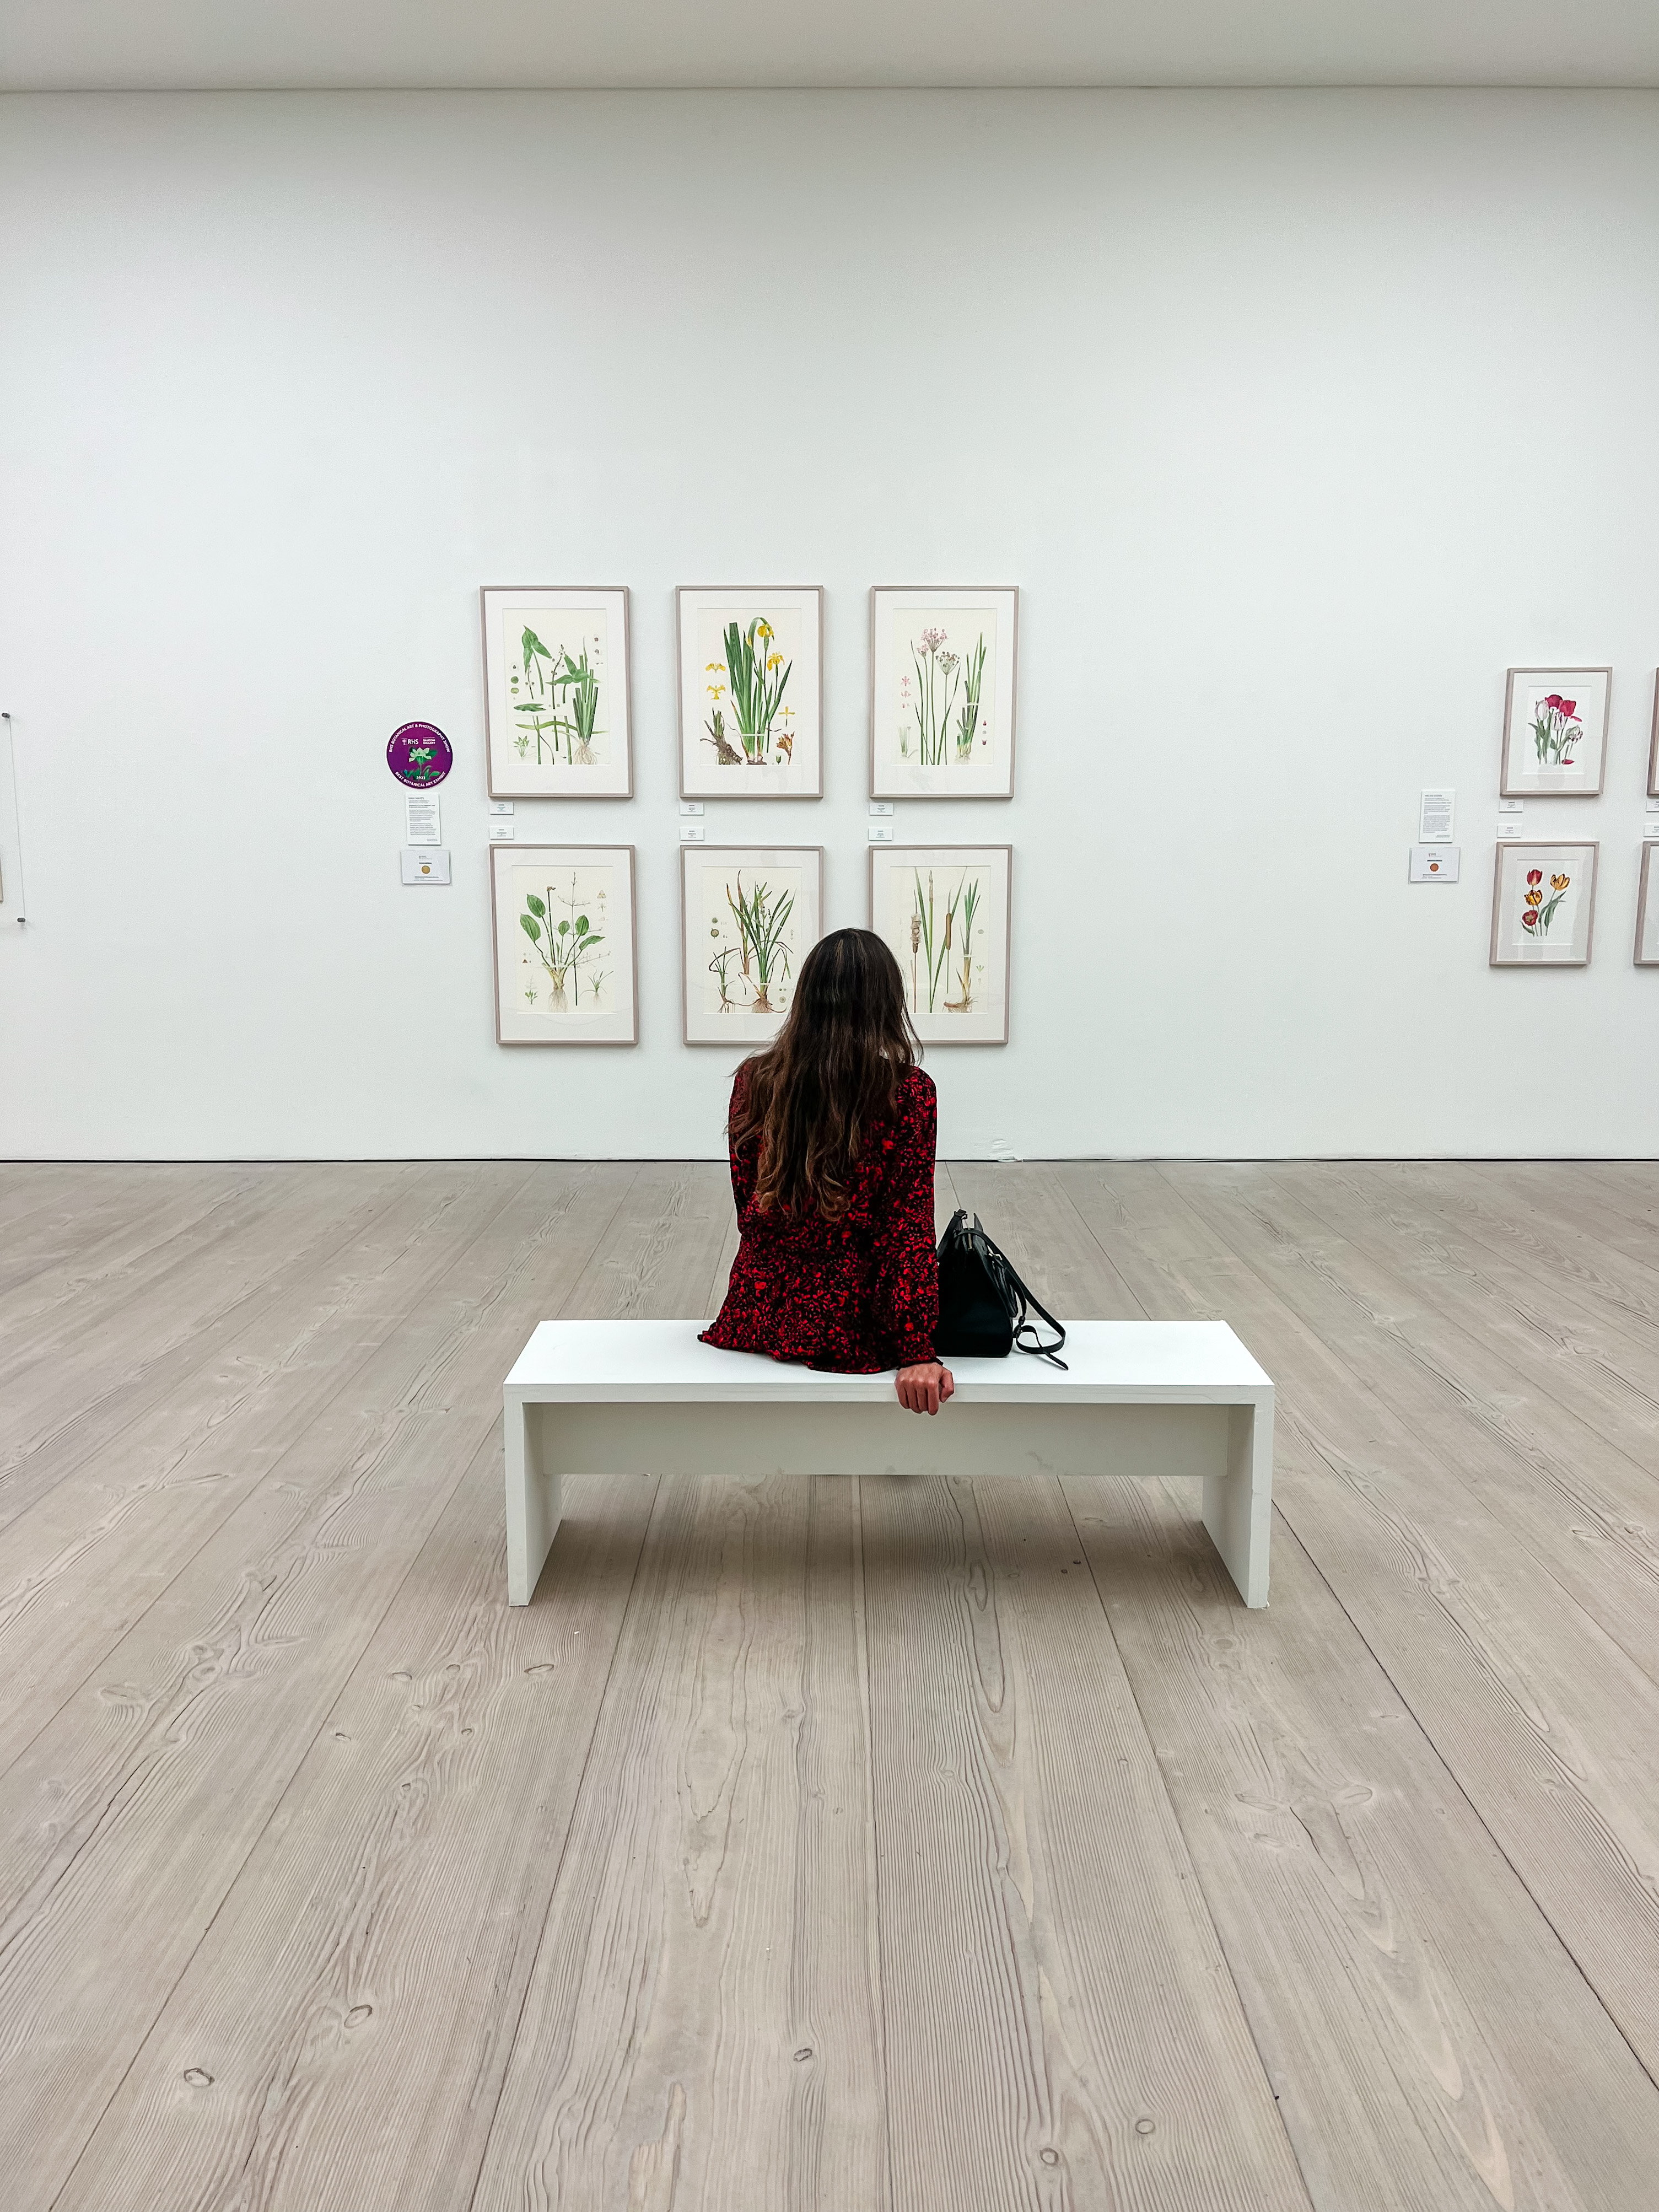 Saatchi Gallery, one of the best things to do in Sloane Square